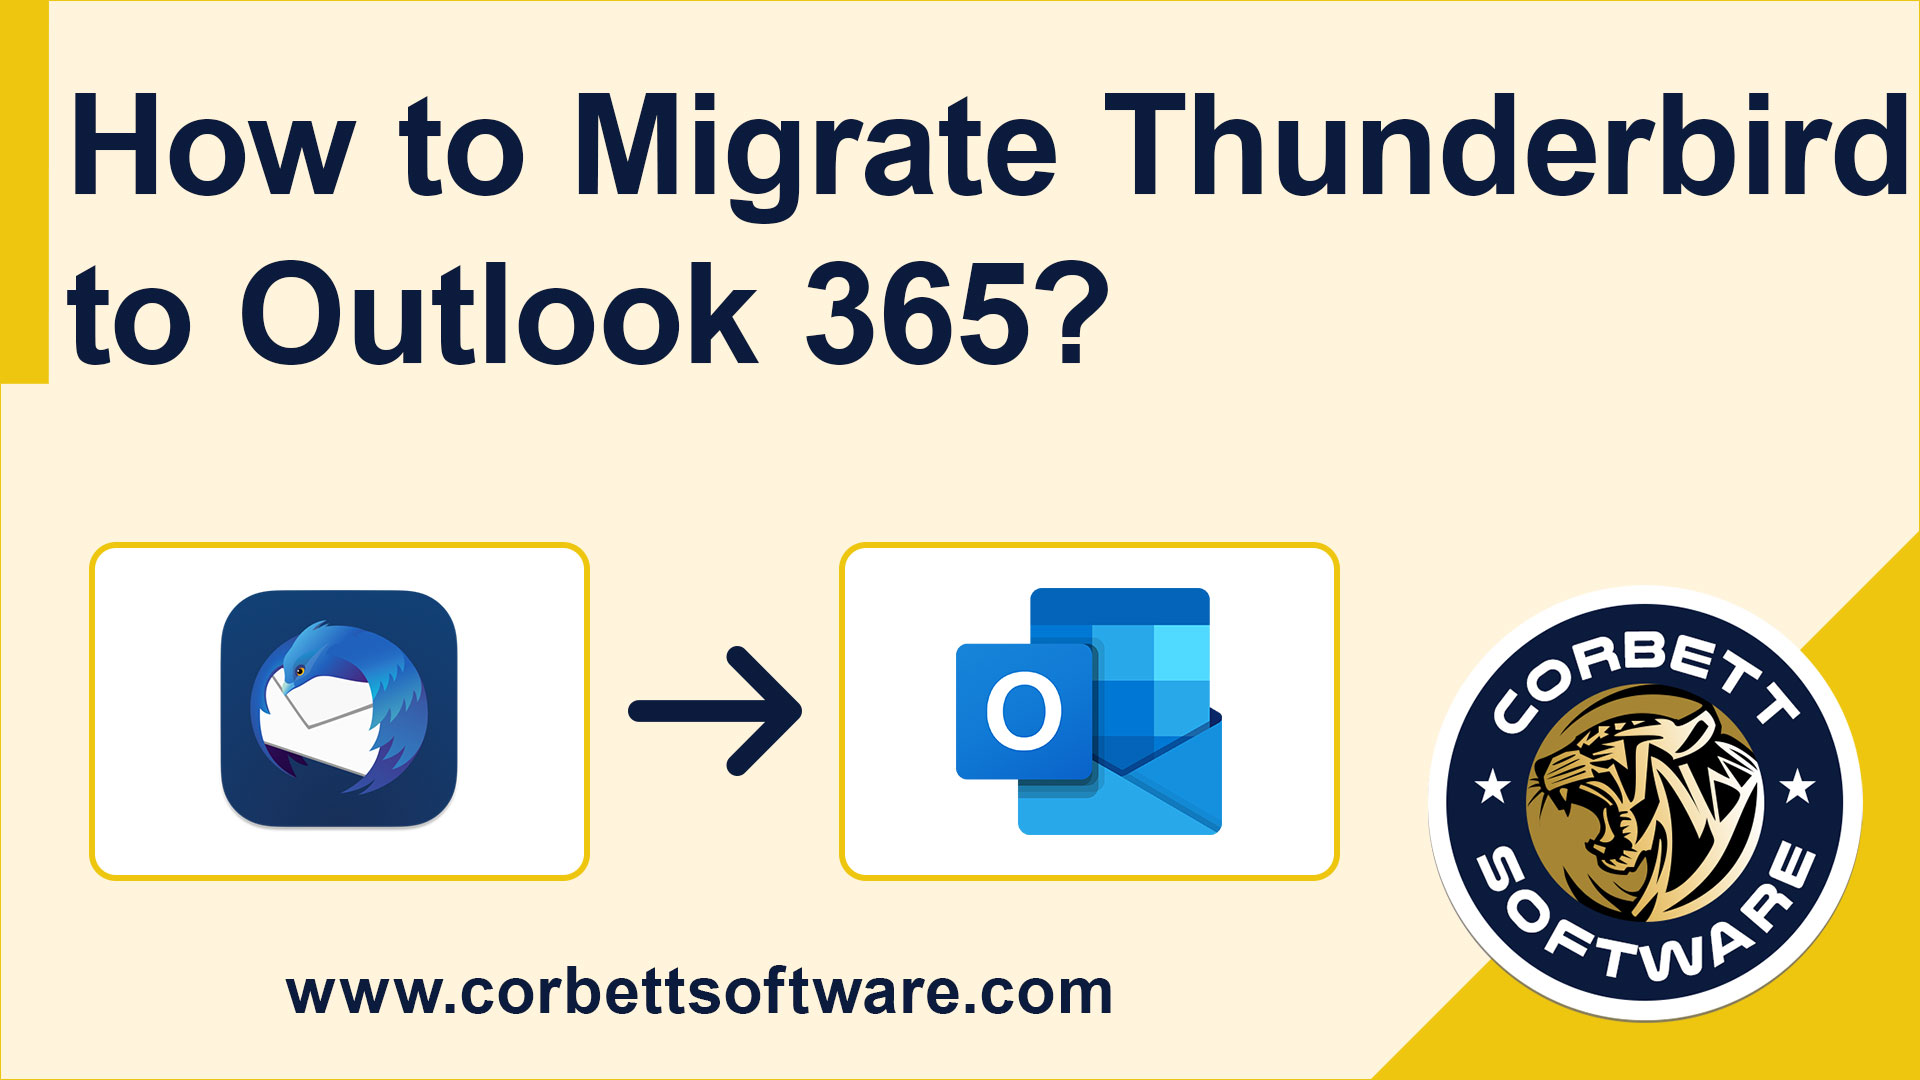 Migrate Thunderbird to Outlook 365